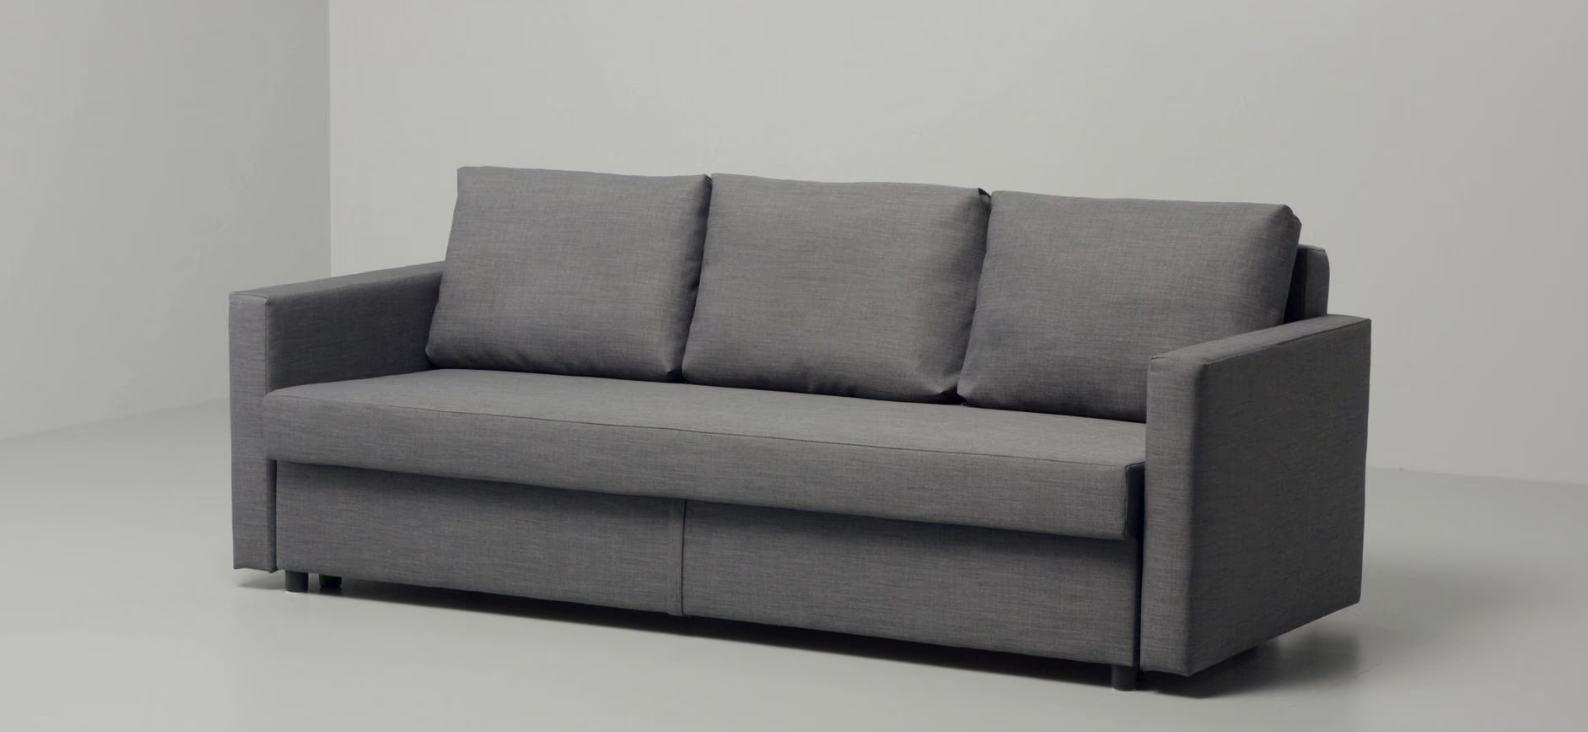 Best Ikea Sleeper Sofa - stylish and comfortable furniture for small spaces